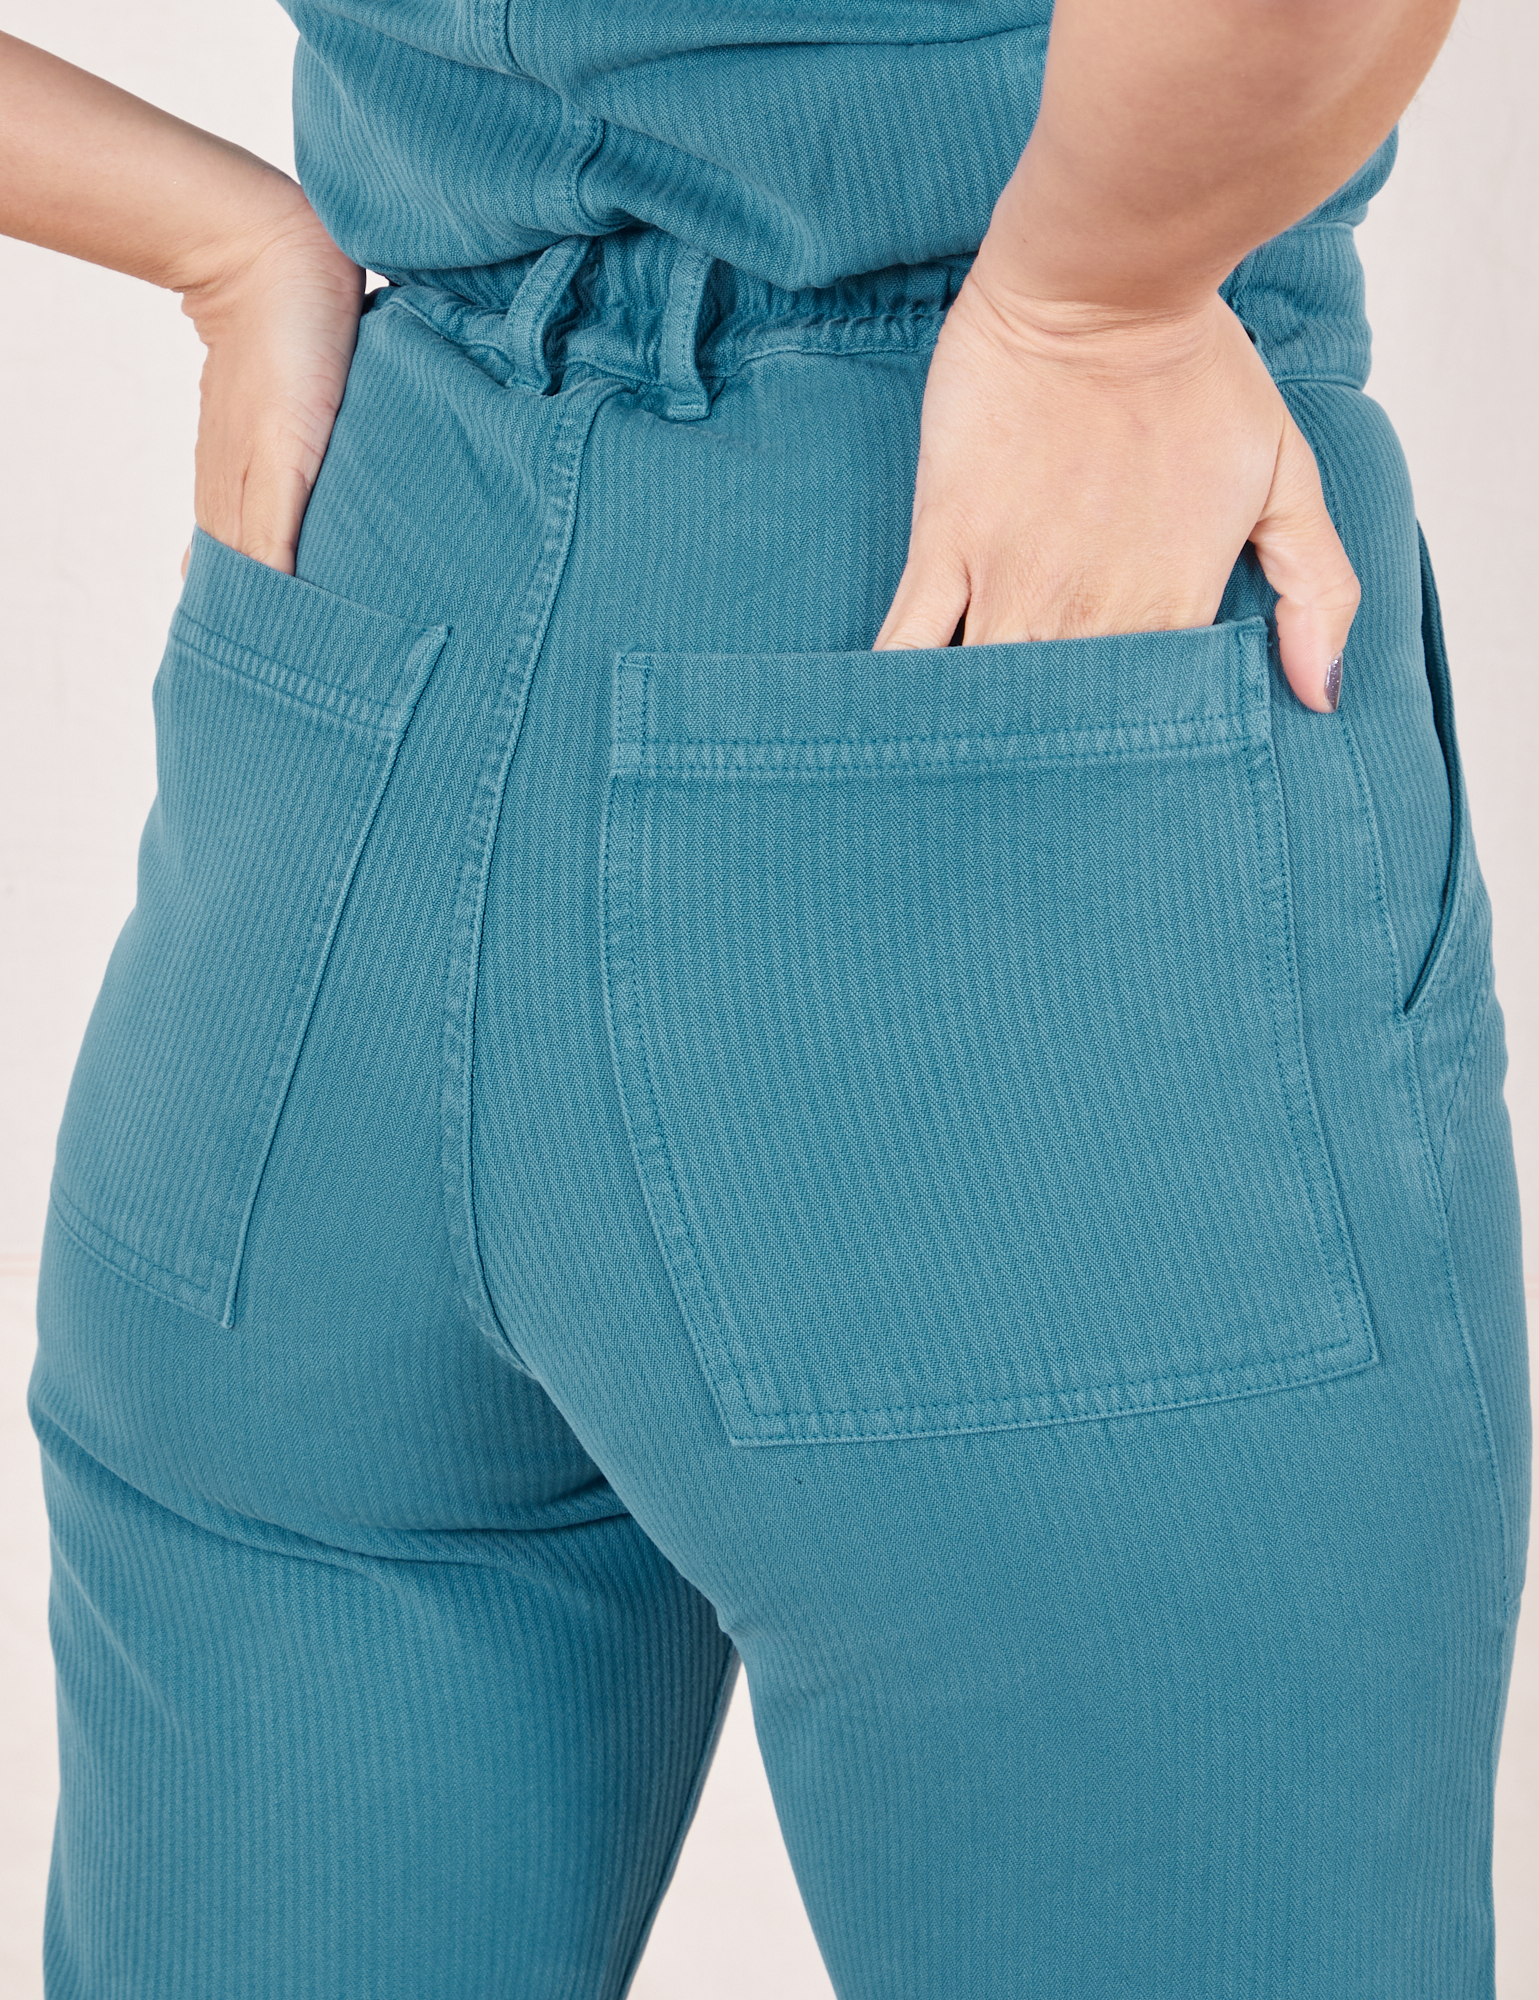 Back pocket close up of Heritage Short Sleeve Jumpsuit in Marine Blue. Tiara has both her hands in the pockets.